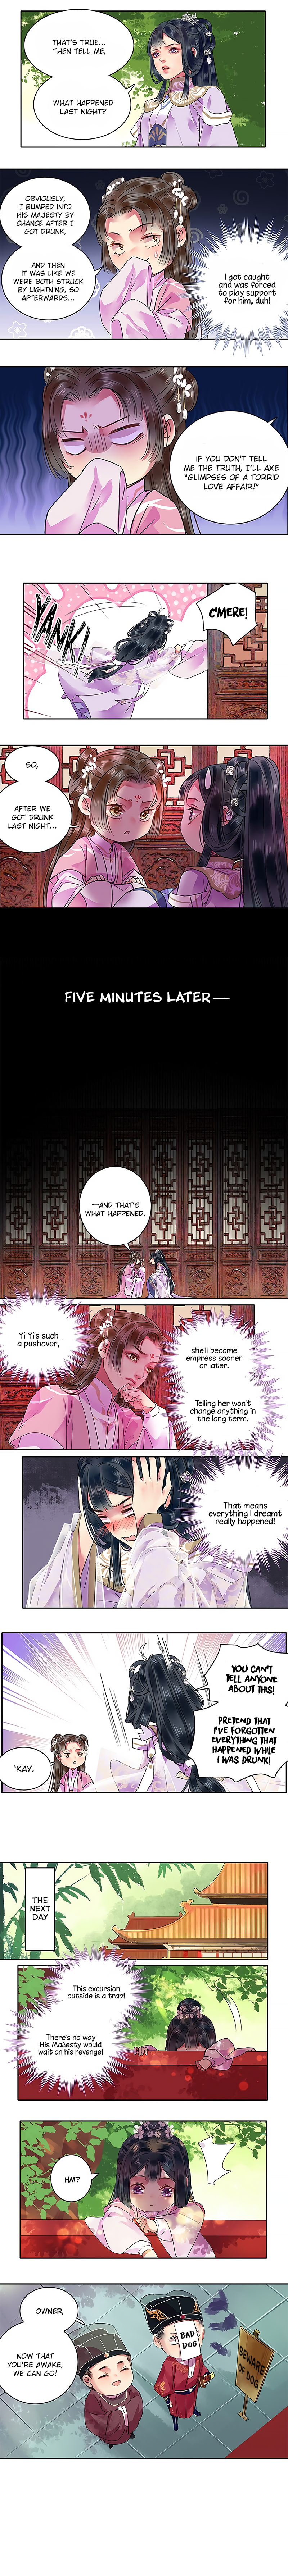 Princess In The Prince's Harem - Page 3